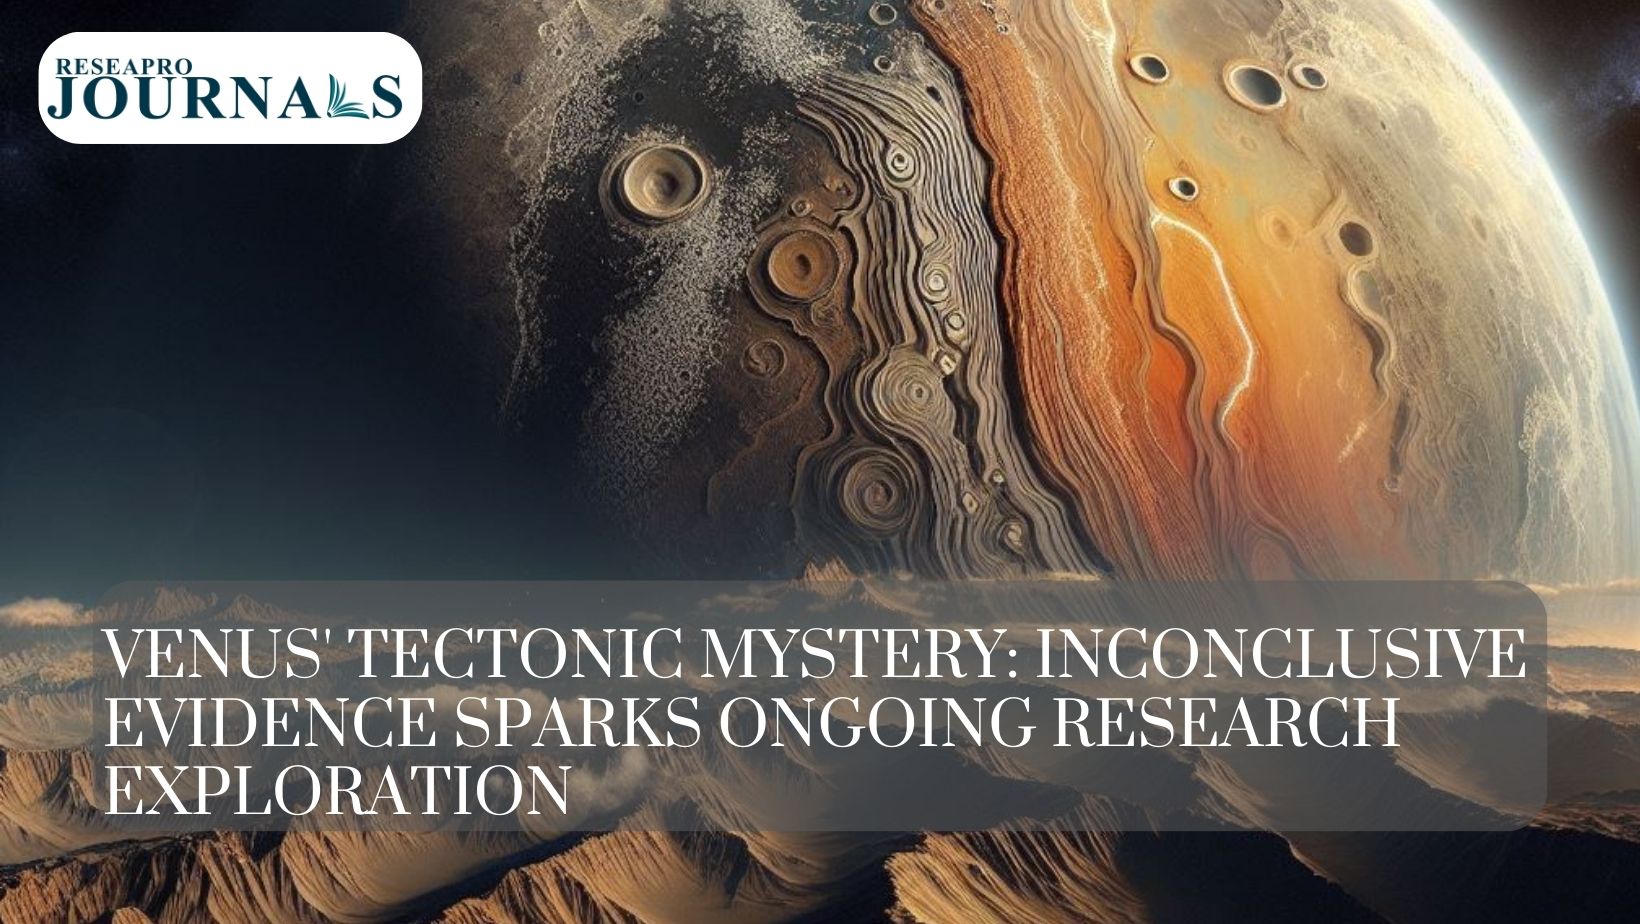 Venus’ tectonic mystery: inconclusive evidence sparks ongoing research exploration